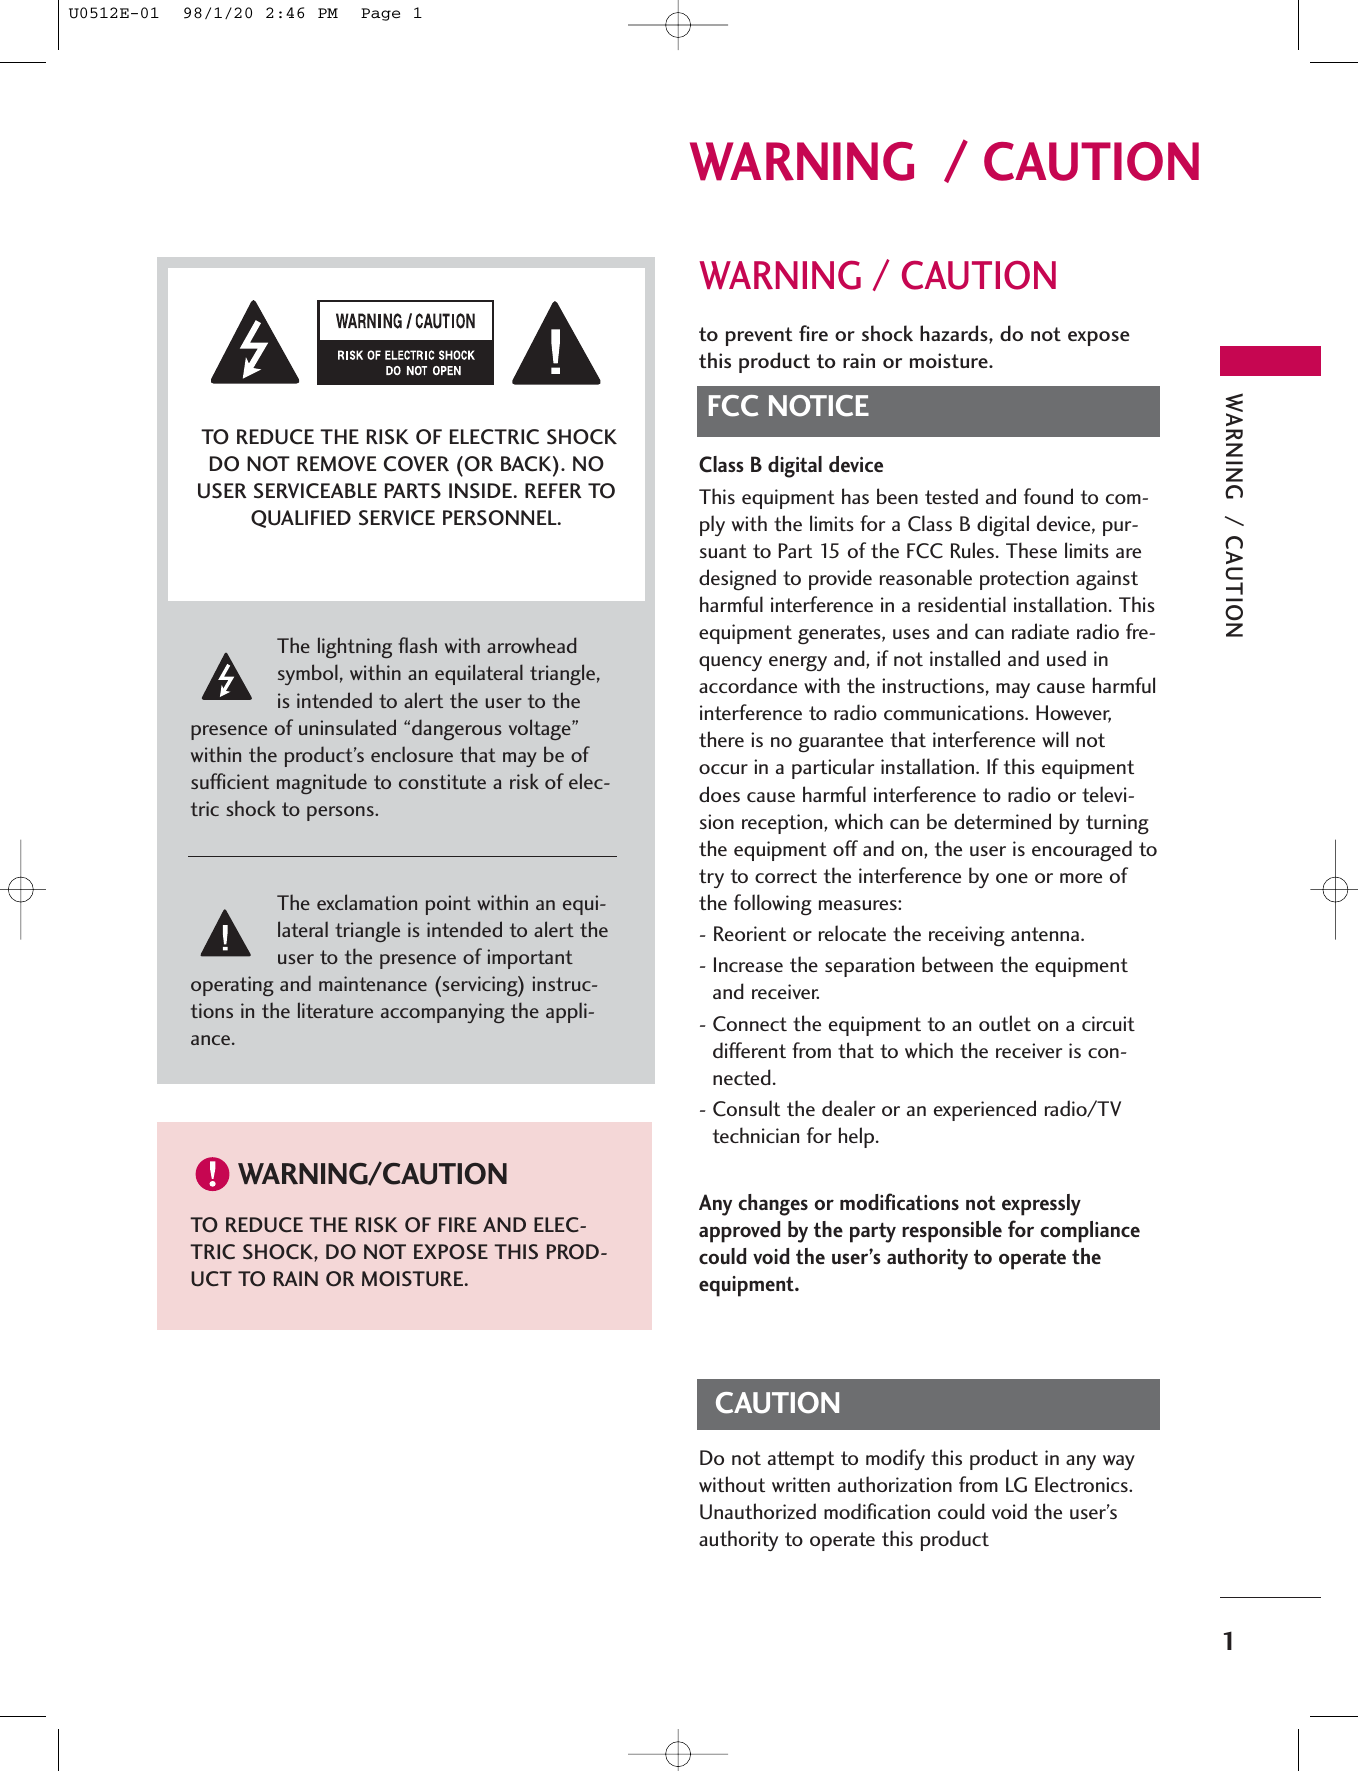 WARNING  / CAUTION1WARNING  / CAUTIONWARNING / CAUTIONto prevent fire or shock hazards, do not exposethis product to rain or moisture.FCC NOTICEClass B digital deviceThis equipment has been tested and found to com-ply with the limits for a Class B digital device, pur-suant to Part 15 of the FCC Rules. These limits aredesigned to provide reasonable protection againstharmful interference in a residential installation. Thisequipment generates, uses and can radiate radio fre-quency energy and, if not installed and used inaccordance with the instructions, may cause harmfulinterference to radio communications. However,there is no guarantee that interference will notoccur in a particular installation. If this equipmentdoes cause harmful interference to radio or televi-sion reception, which can be determined by turningthe equipment off and on, the user is encouraged totry to correct the interference by one or more ofthe following measures:- Reorient or relocate the receiving antenna.- Increase the separation between the equipmentand receiver.- Connect the equipment to an outlet on a circuitdifferent from that to which the receiver is con-nected.- Consult the dealer or an experienced radio/TVtechnician for help.Any changes or modifications not expresslyapproved by the party responsible for compliancecould void the user’s authority to operate theequipment. CAUTIONDo not attempt to modify this product in any waywithout written authorization from LG Electronics.Unauthorized modification could void the user’sauthority to operate this product The lightning flash with arrowheadsymbol, within an equilateral triangle,is intended to alert the user to thepresence of uninsulated “dangerous voltage”within the product’s enclosure that may be ofsufficient magnitude to constitute a risk of elec-tric shock to persons.The exclamation point within an equi-lateral triangle is intended to alert theuser to the presence of importantoperating and maintenance (servicing) instruc-tions in the literature accompanying the appli-ance.TO REDUCE THE RISK OF ELECTRIC SHOCKDO NOT REMOVE COVER (OR BACK). NOUSER SERVICEABLE PARTS INSIDE. REFER TOQUALIFIED SERVICE PERSONNEL.WARNING/CAUTIONTO REDUCE THE RISK OF FIRE AND ELEC-TRIC SHOCK, DO NOT EXPOSE THIS PROD-UCT TO RAIN OR MOISTURE.U0512E-01  98/1/20 2:46 PM  Page 1